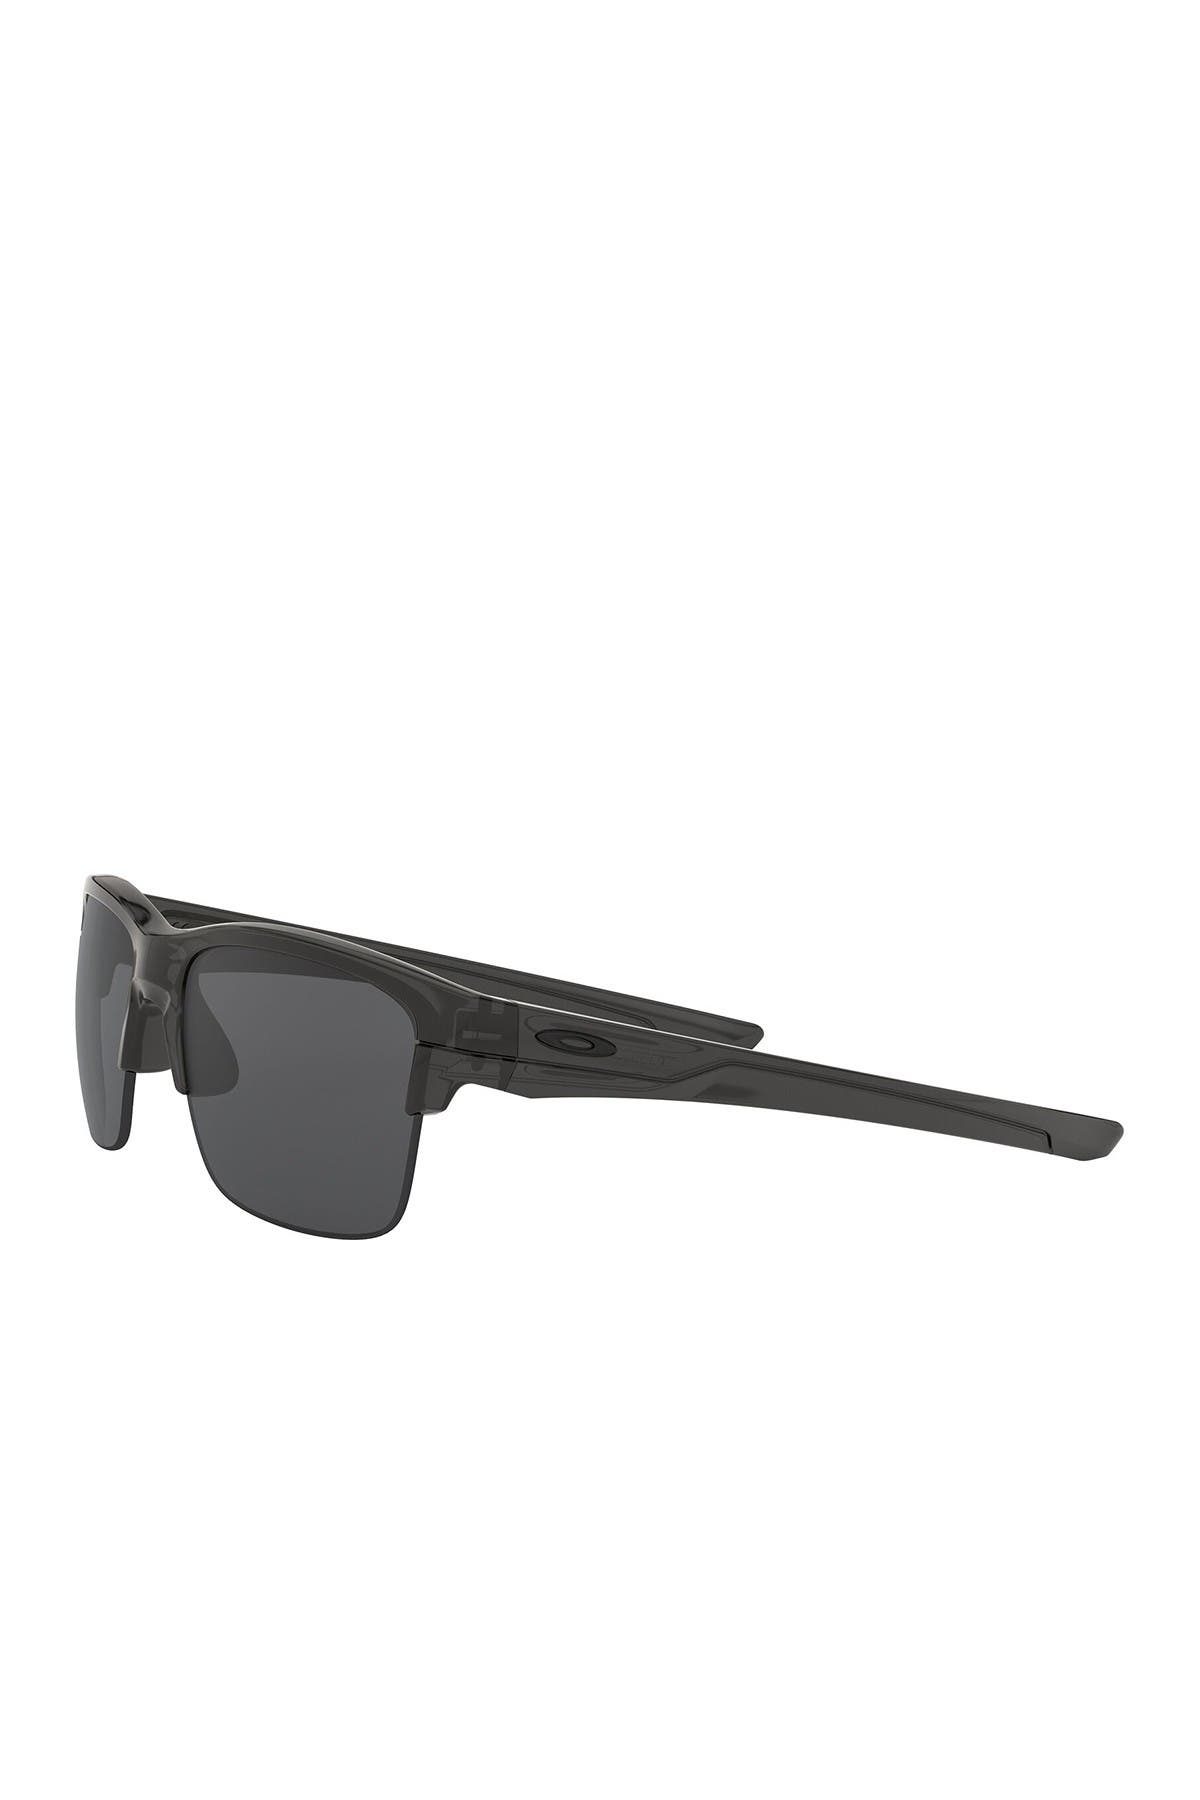 oakley clubmaster style